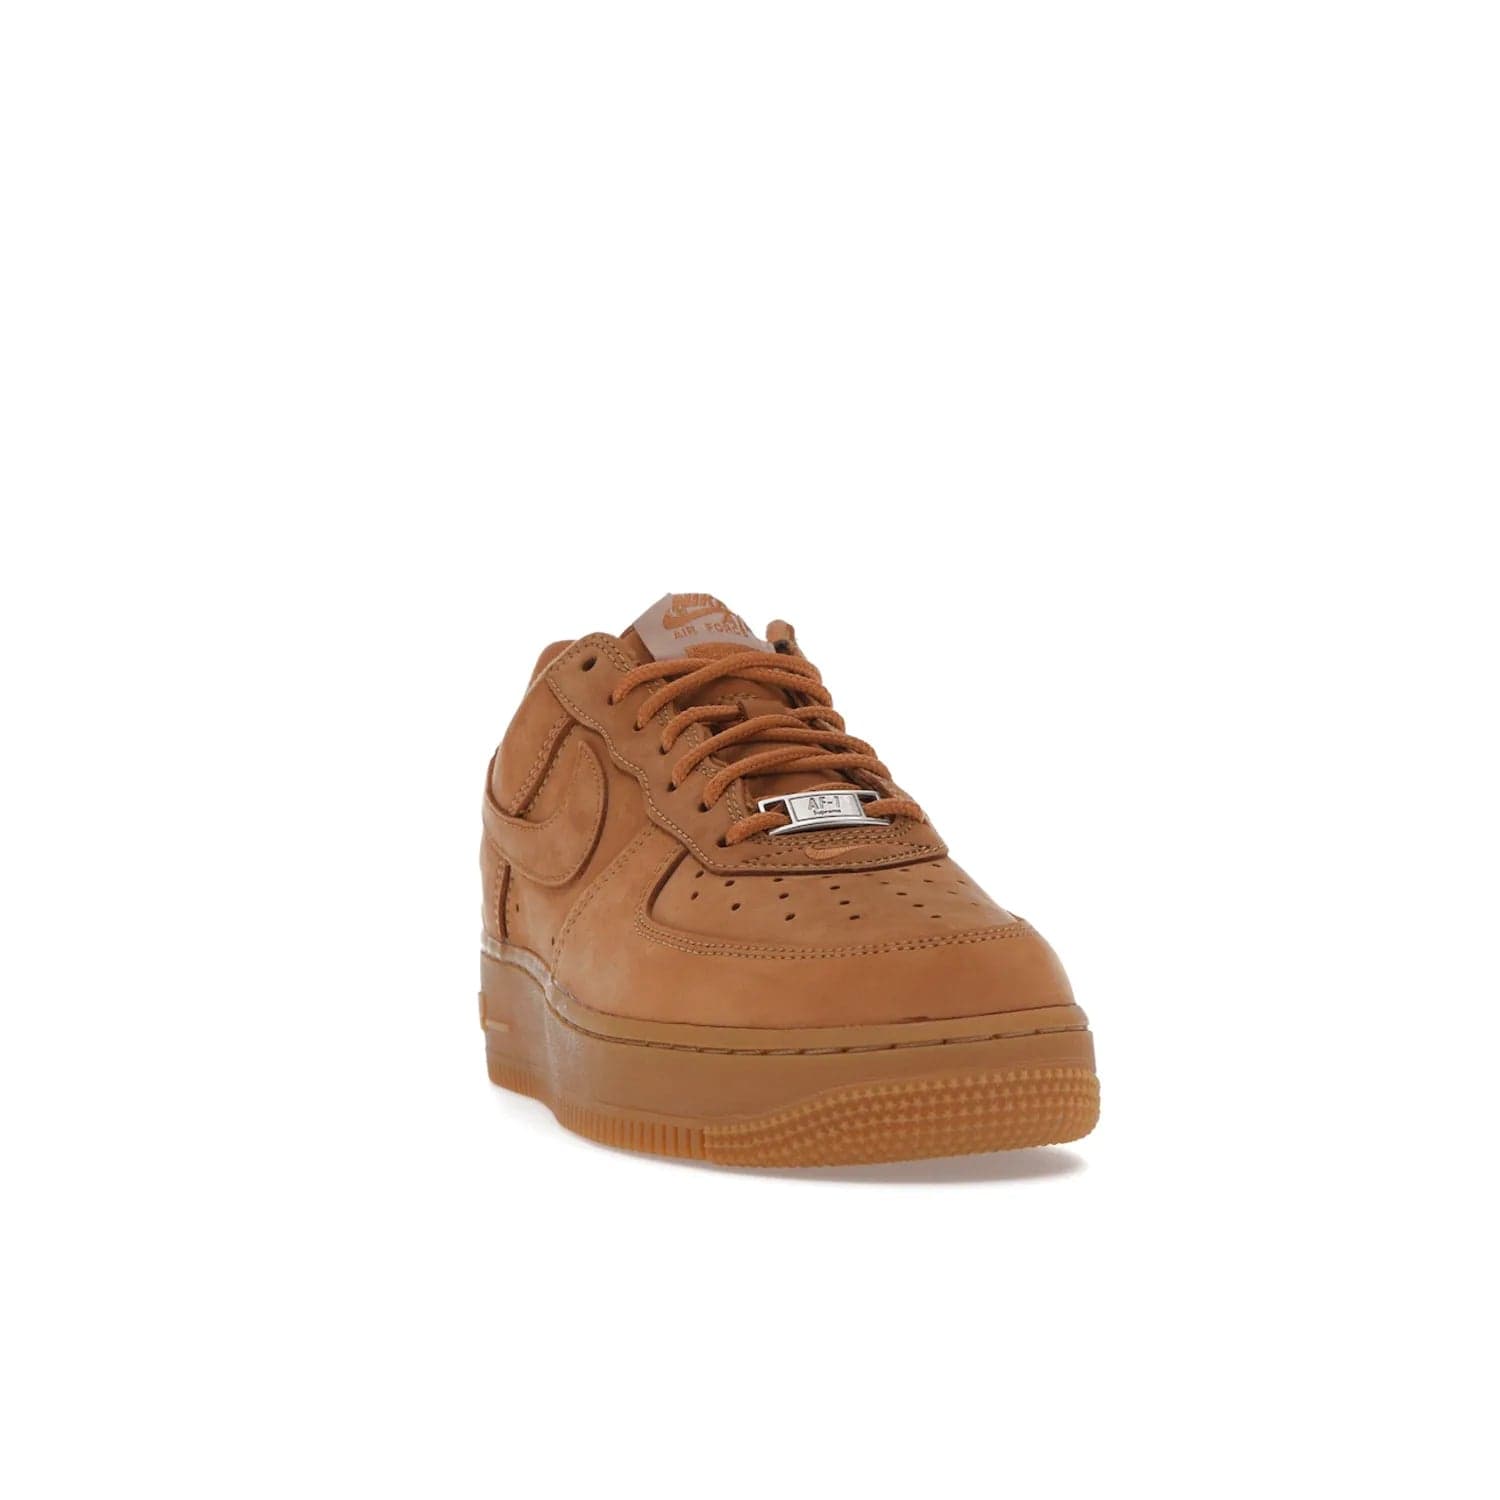 Nike Air Force 1 Low SP Supreme Wheat - Image 8 - Only at www.BallersClubKickz.com - A luxe Flax Durabuck upper and Supreme Box Logo insignias on the lateral heels make the Nike Air Force 1 Low SP Supreme Wheat a stylish lifestyle shoe. Matching Flax Air sole adds a classic touch to this collaboration between Nike and Supreme. Make a statement with this edition of the classic Air Force 1 Low.